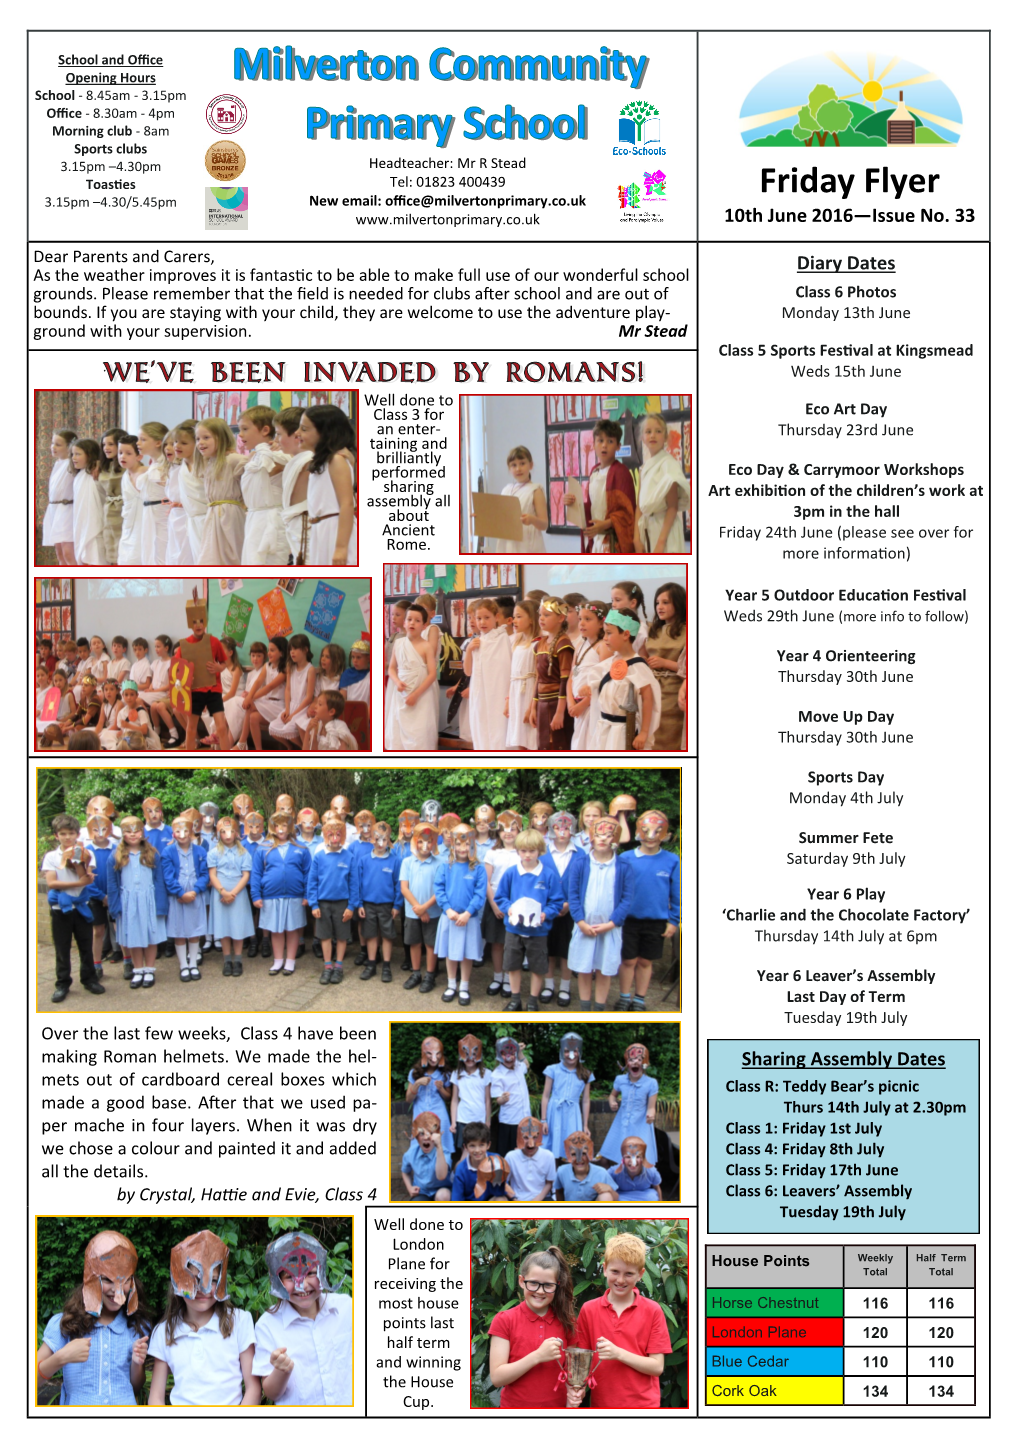 Friday Flyer 3.15Pm –4.30/5.45Pm New Email: Office@Milvertonprimary.Co.Uk 10Th June 2016—Issue No